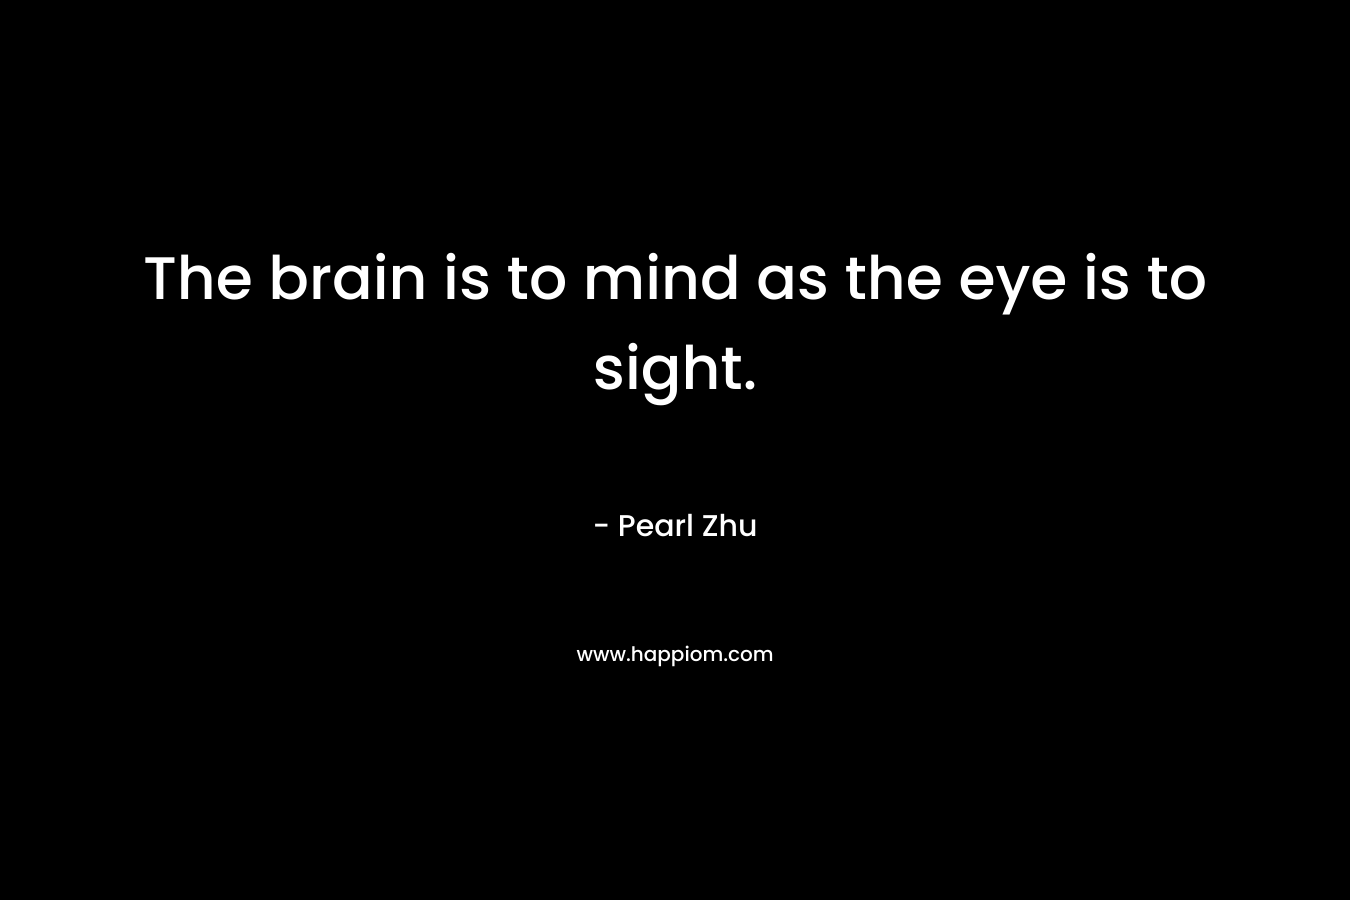 The brain is to mind as the eye is to sight.